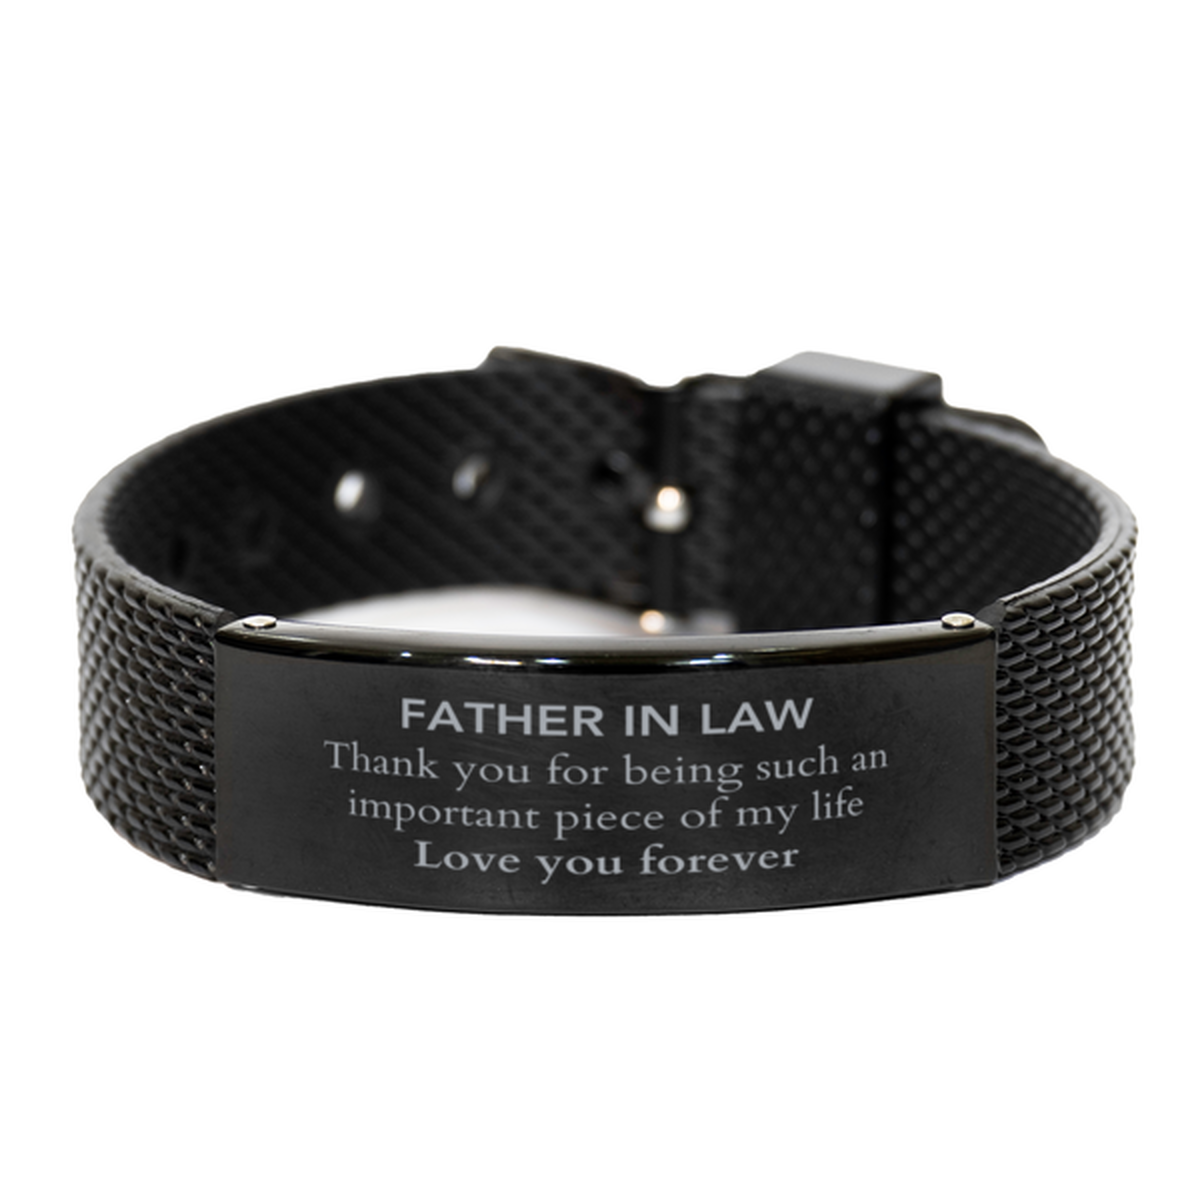 Appropriate Father In Law Black Shark Mesh Bracelet Epic Birthday Gifts for Father In Law Thank you for being such an important piece of my life Father In Law Christmas Mothers Fathers Day